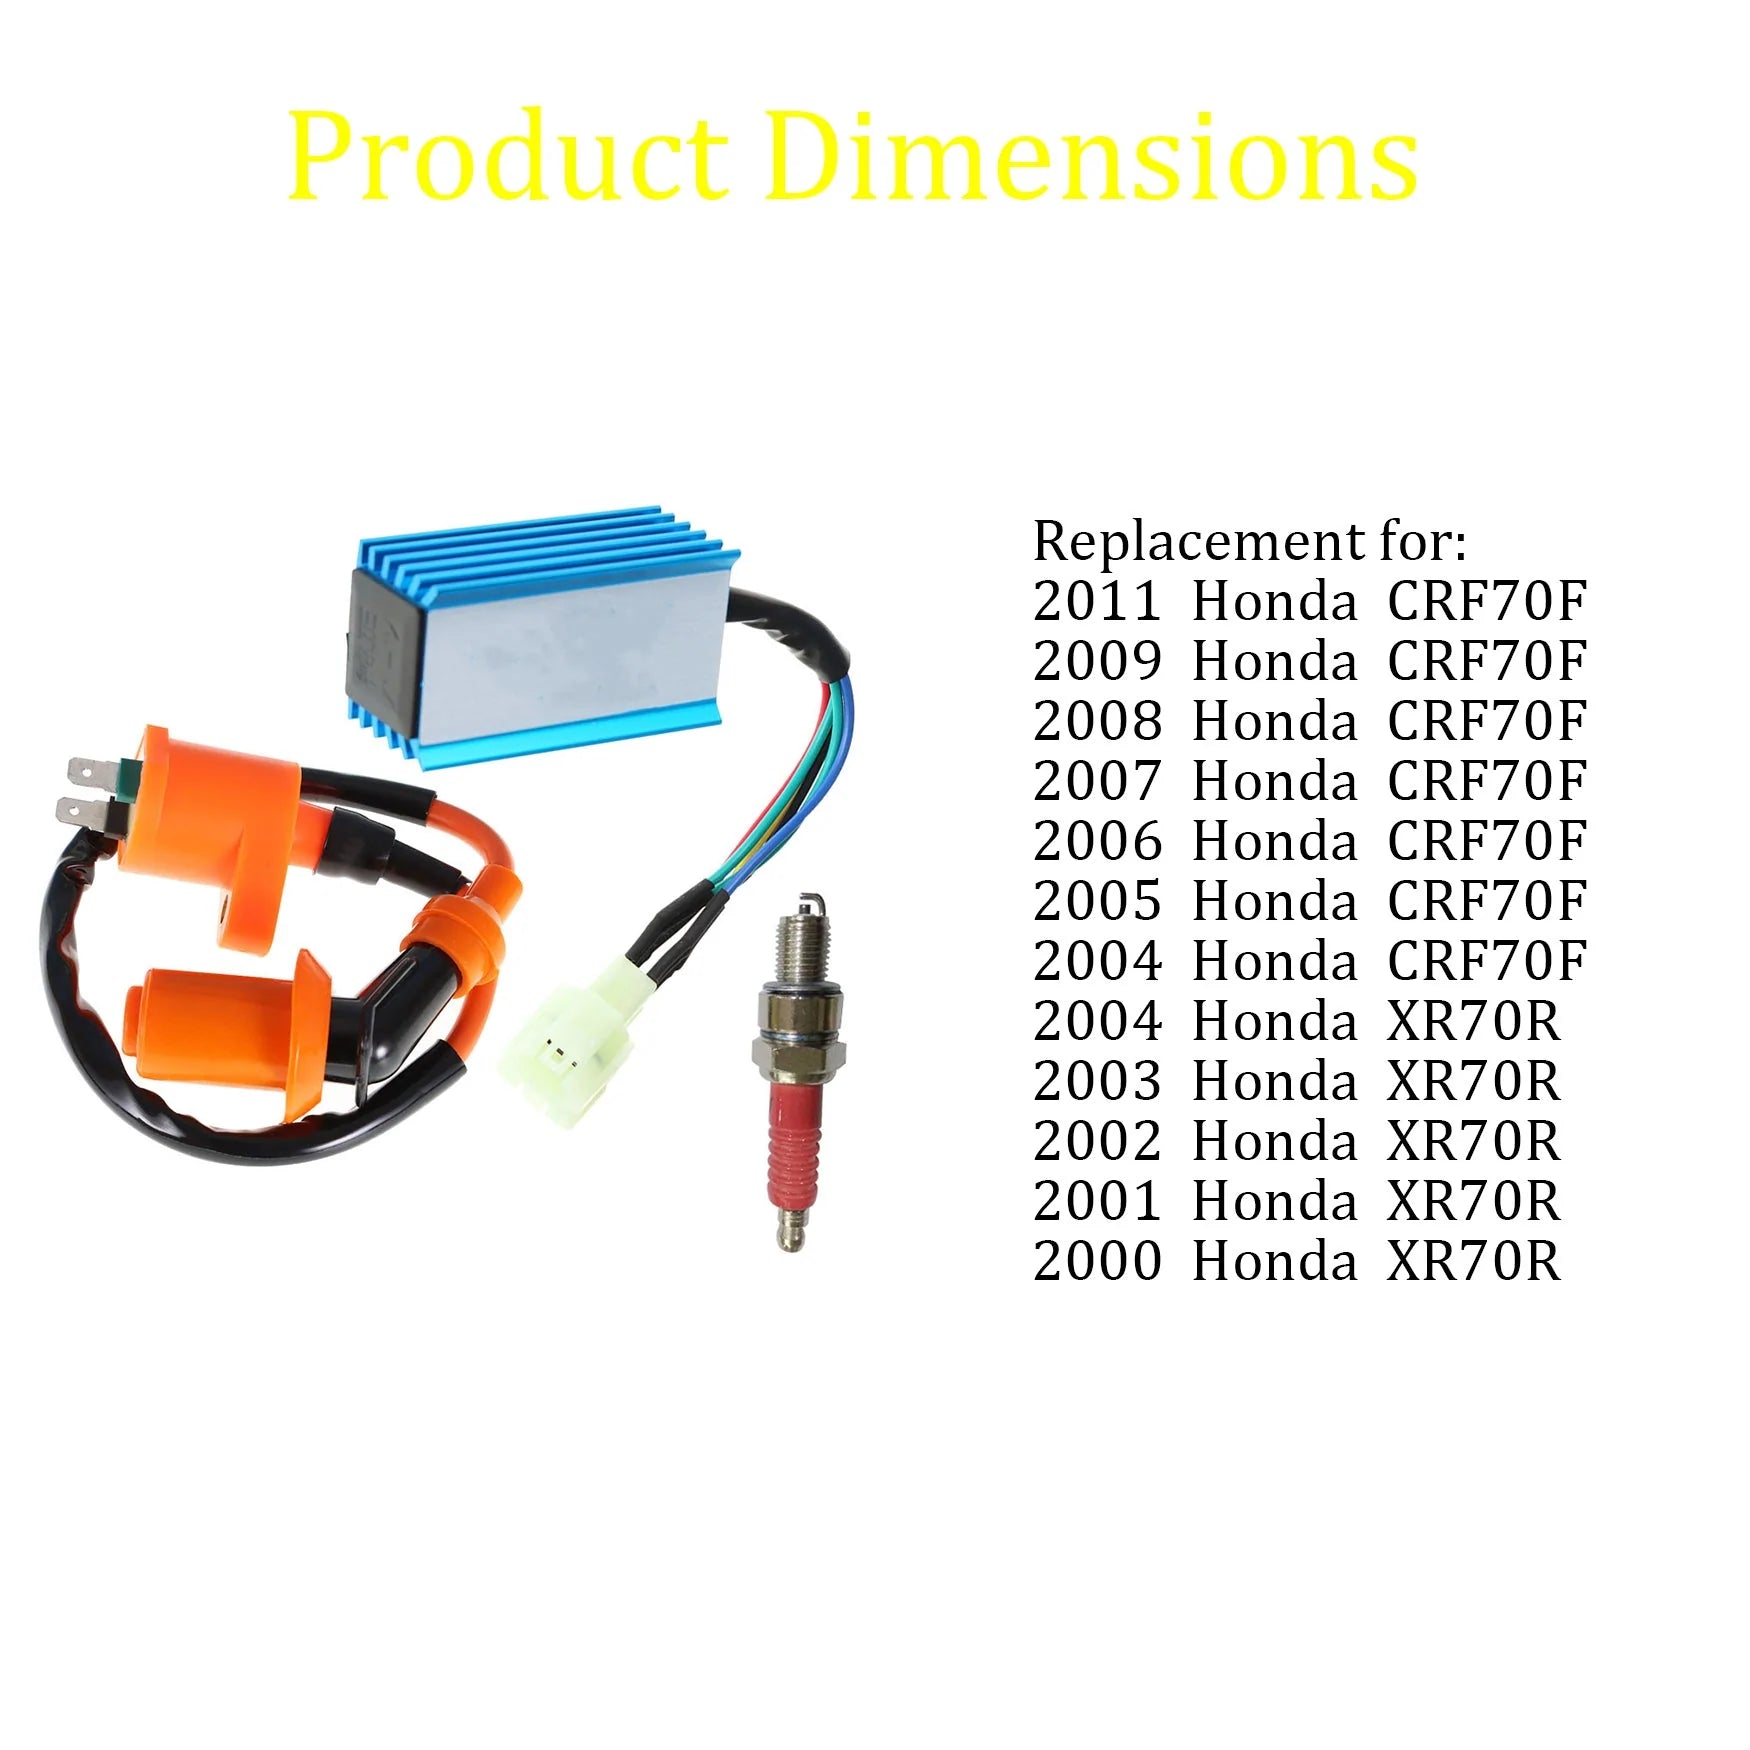 labwork CDI Rev Box Ignition Coil A7TC Spark Plug Replacement for Honda CRF70F 2004-2011 / XR70 1998-2004 LAB WORK MOTO